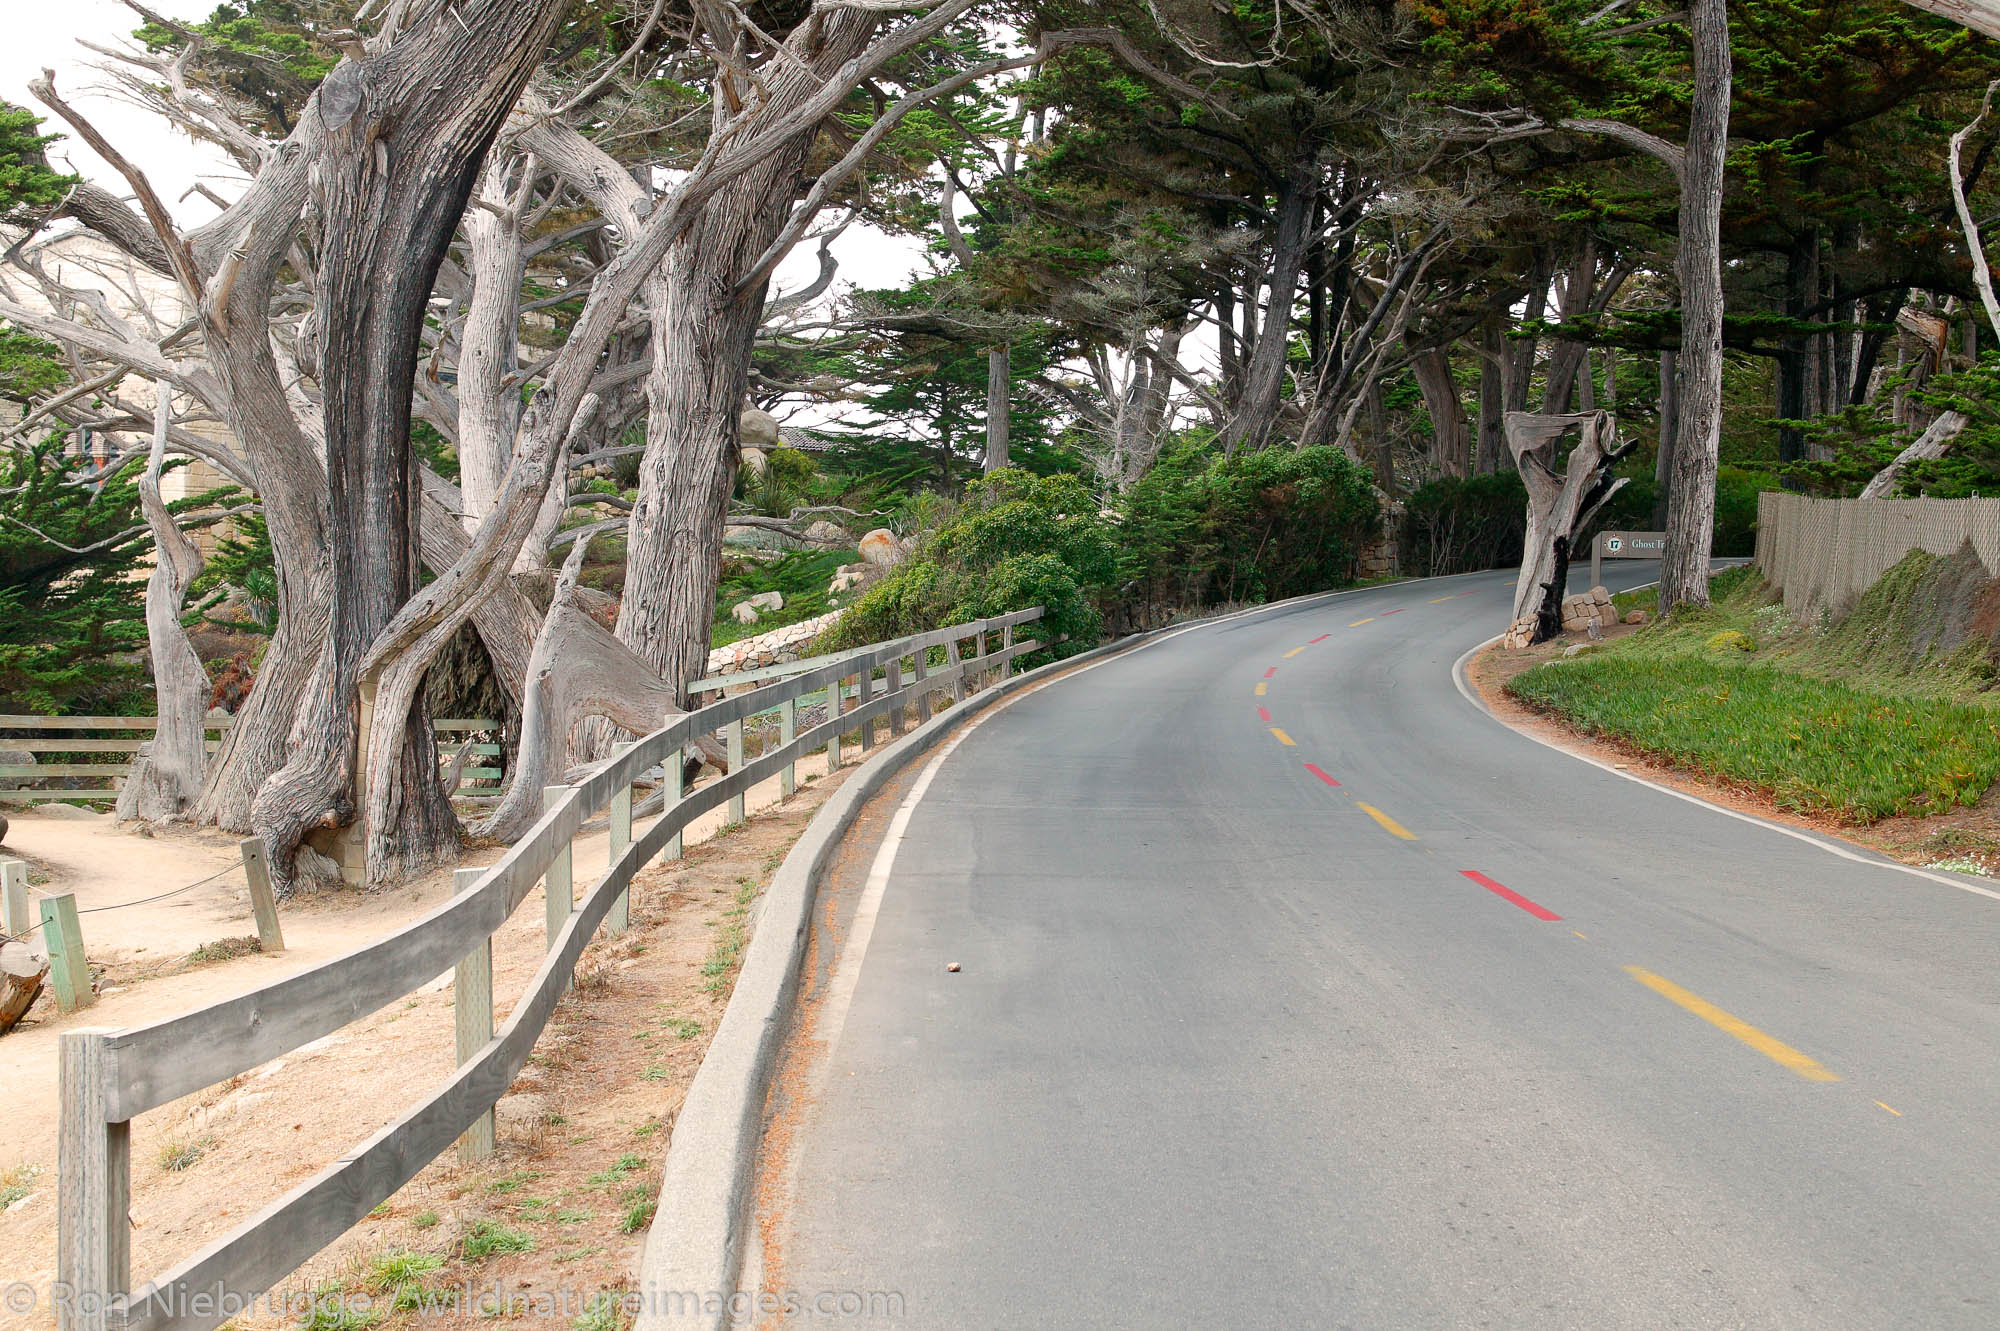 The road near the Ghost Tree and Pescadero Point on the 17 Mile Drive on the Monterey Peninsula, California.